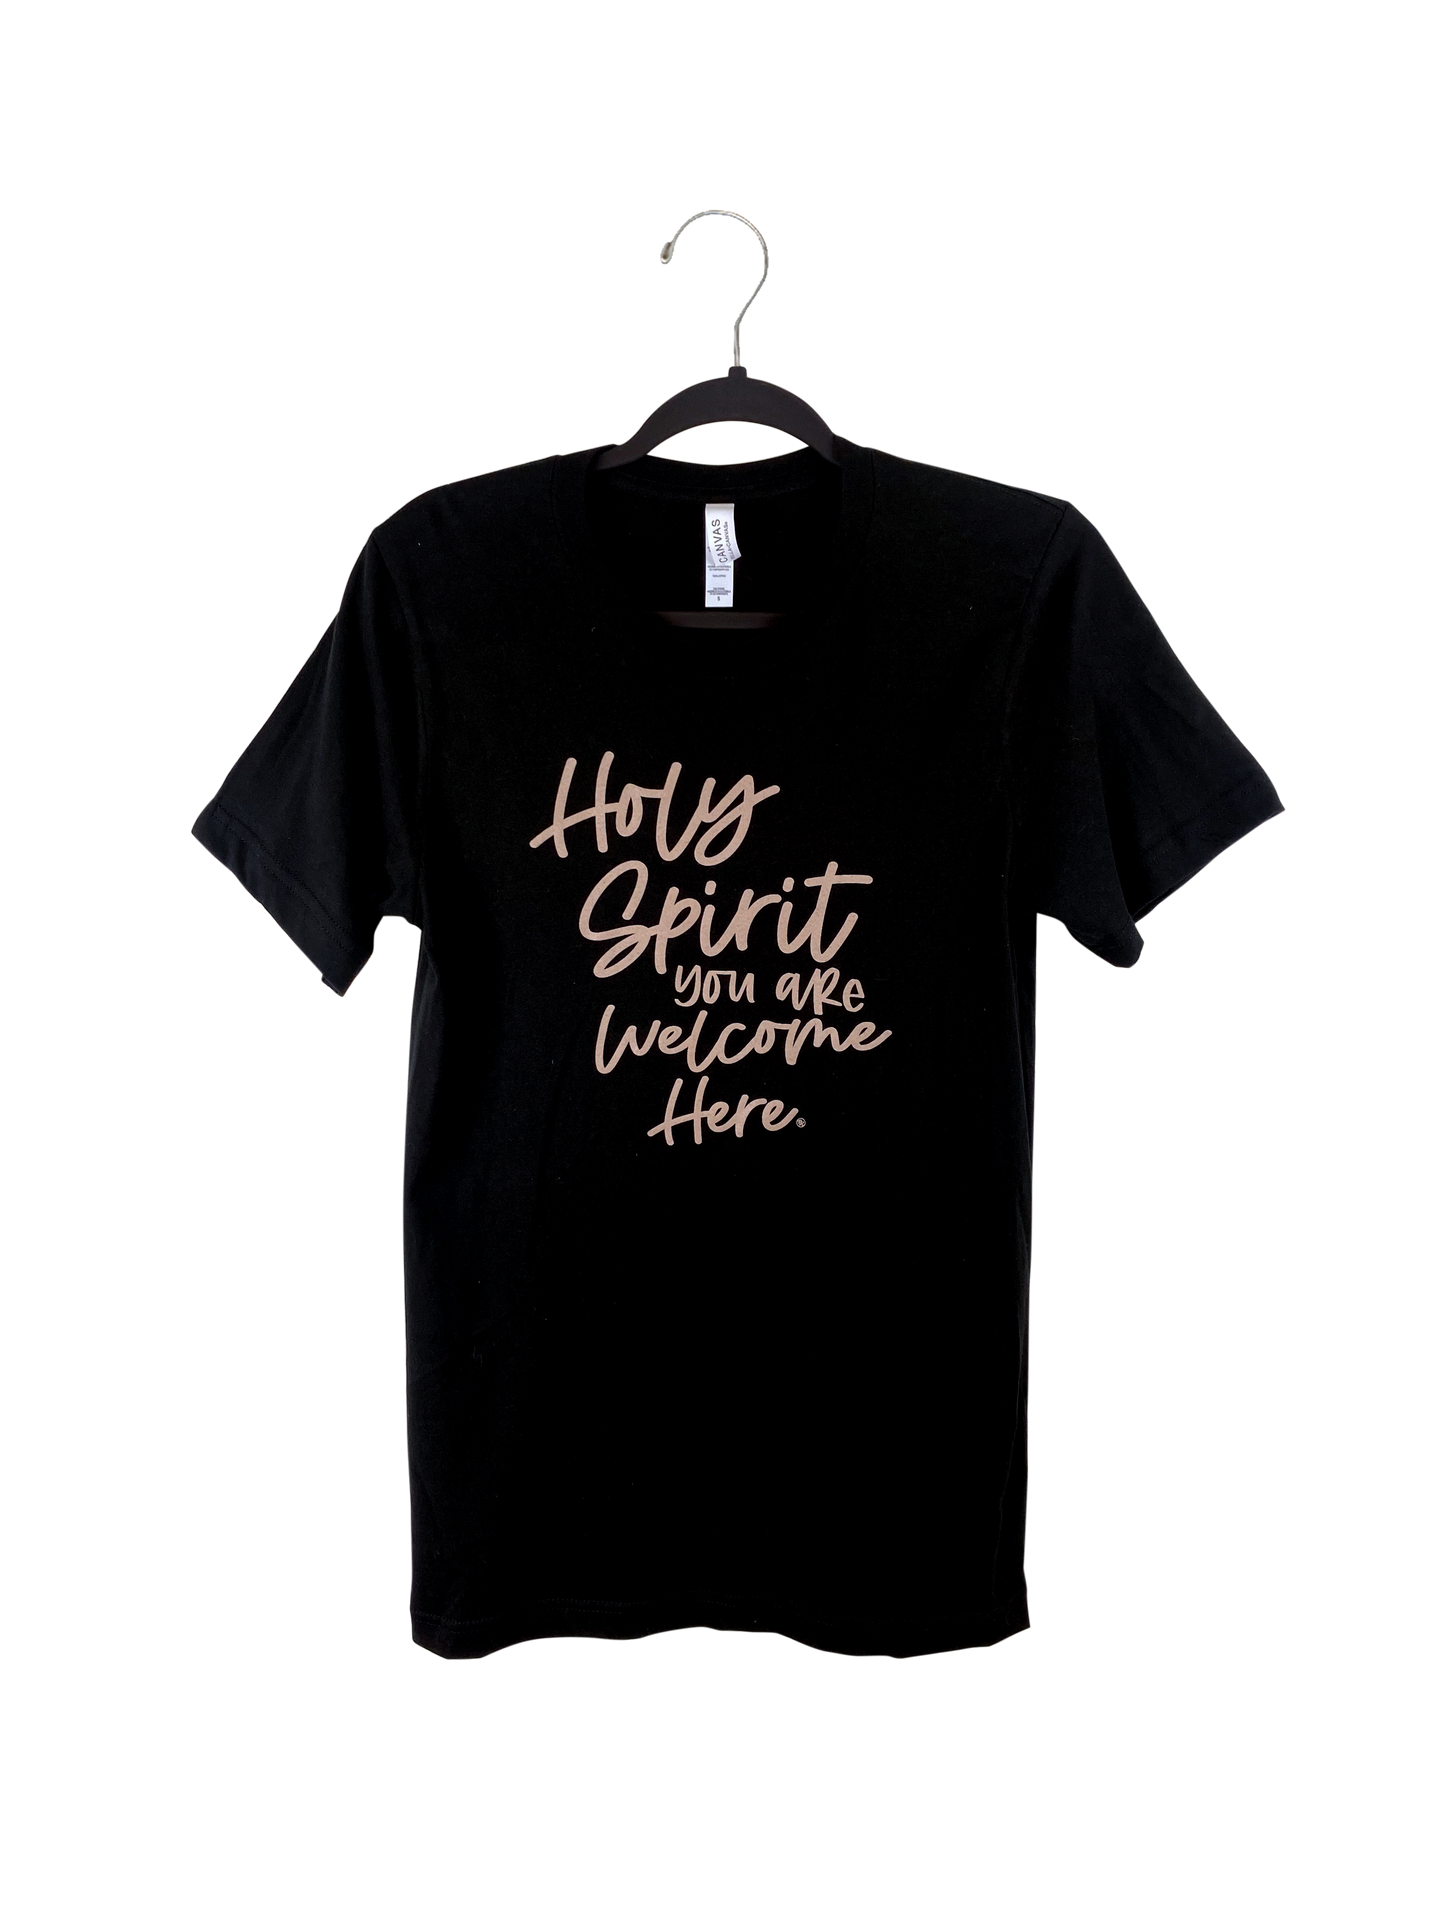 Holy Spirit You Are Welcome Here - Black - Unisex T-Shirt